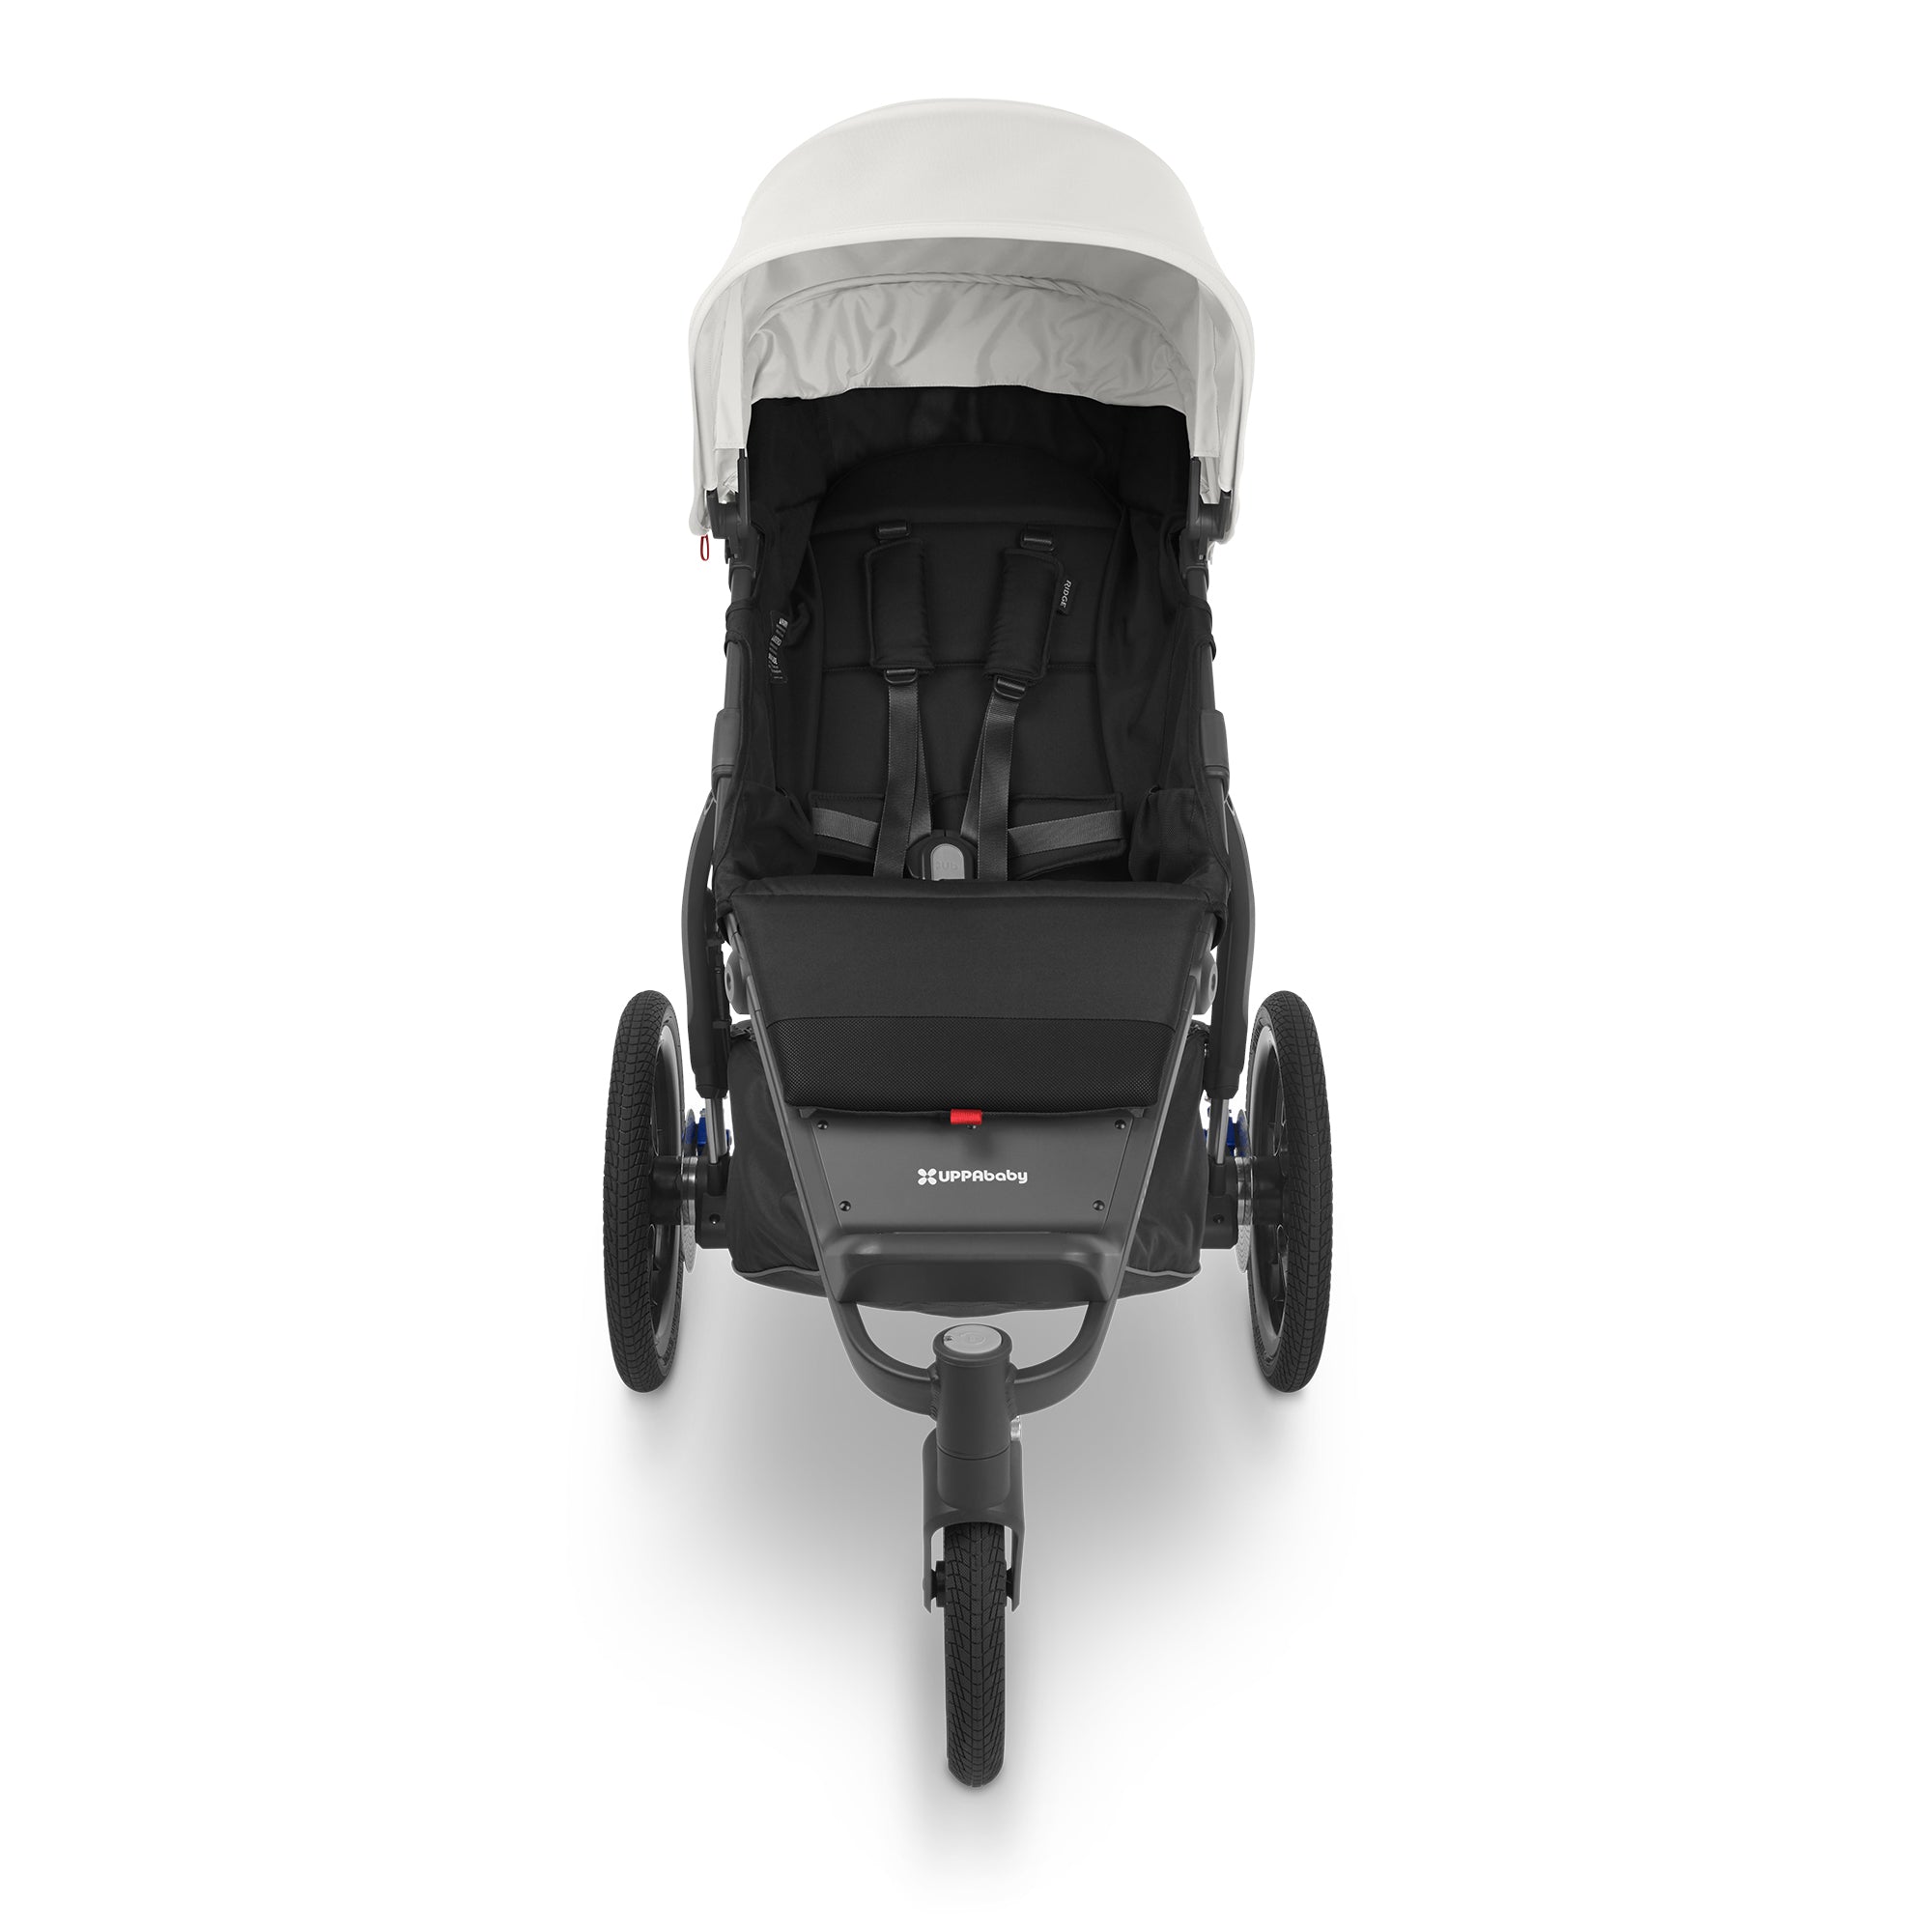 UPPAbaby RIDGE All-Terrain Stroller - Bryce (White/Carbon) 2